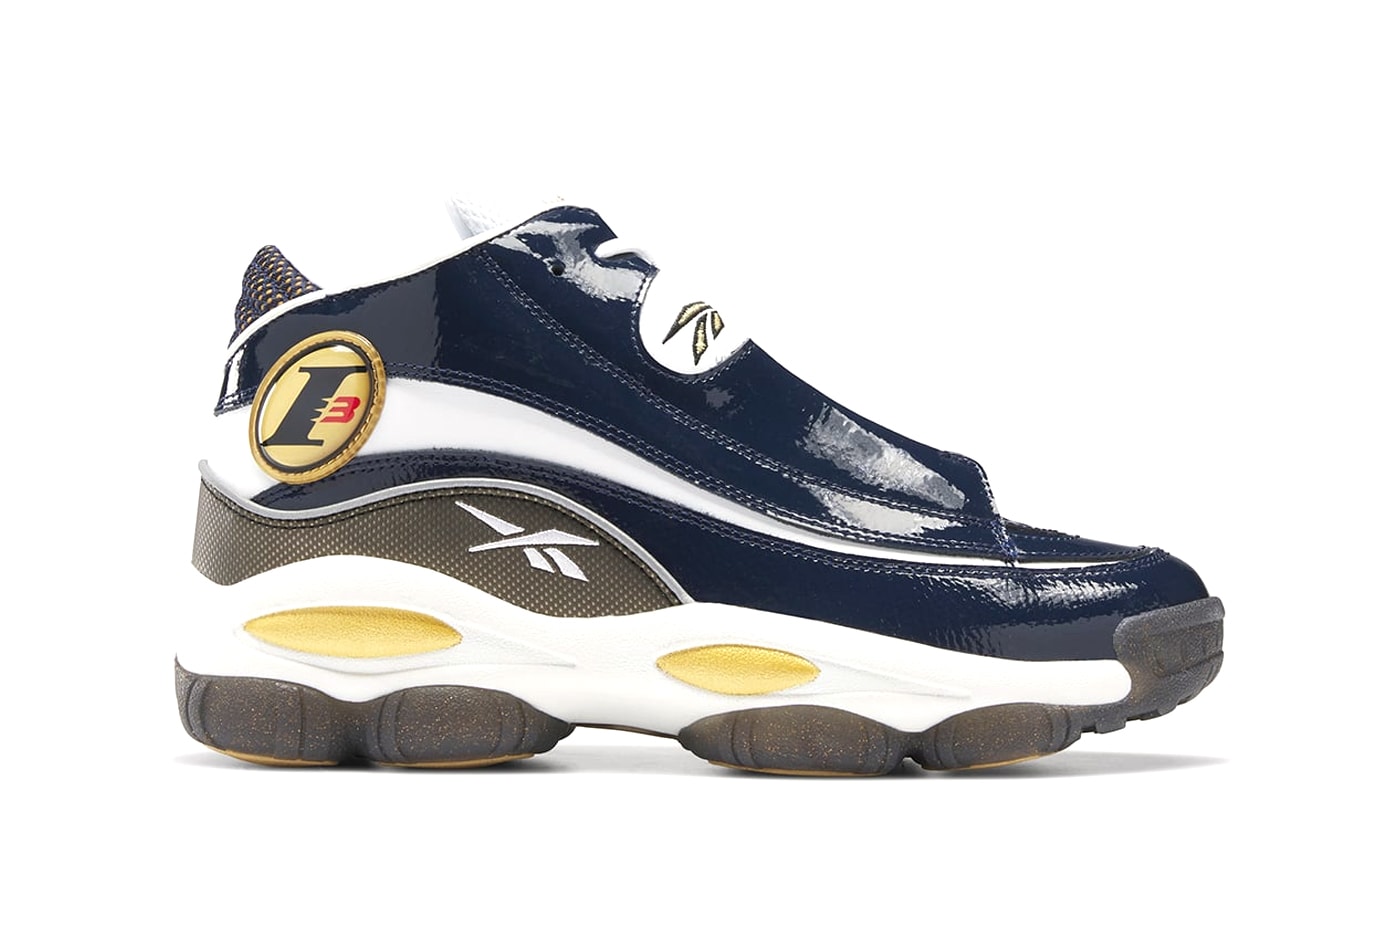 Reebok Answer DMX Georgetown march madness 2023 Mens Basketball collegiate pack release info date price